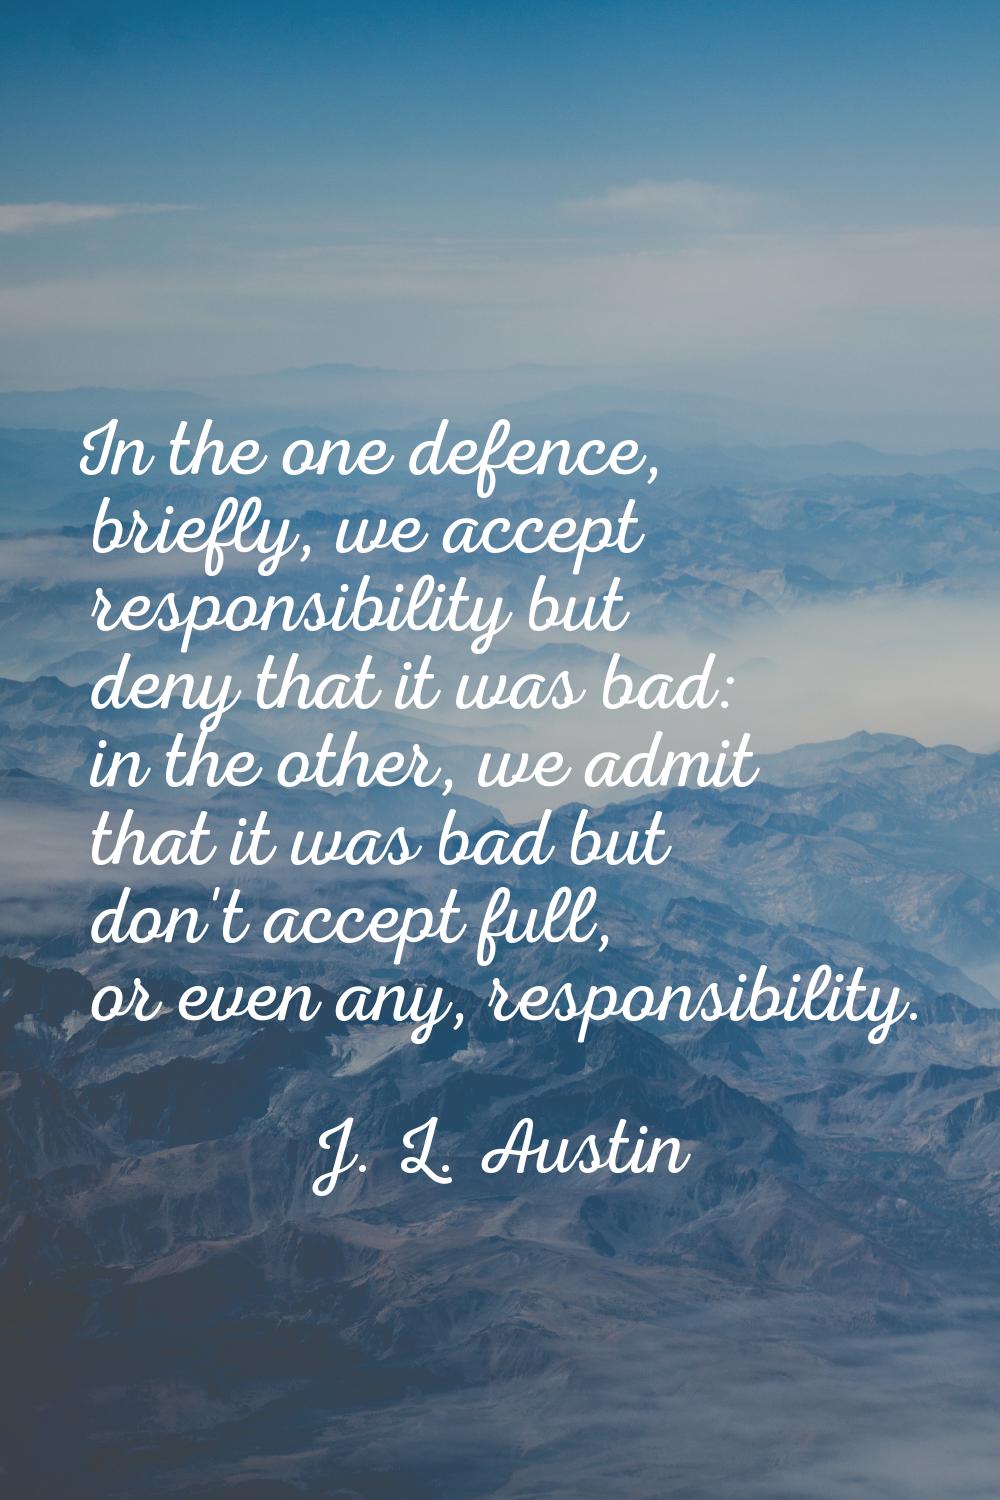 In the one defence, briefly, we accept responsibility but deny that it was bad: in the other, we ad